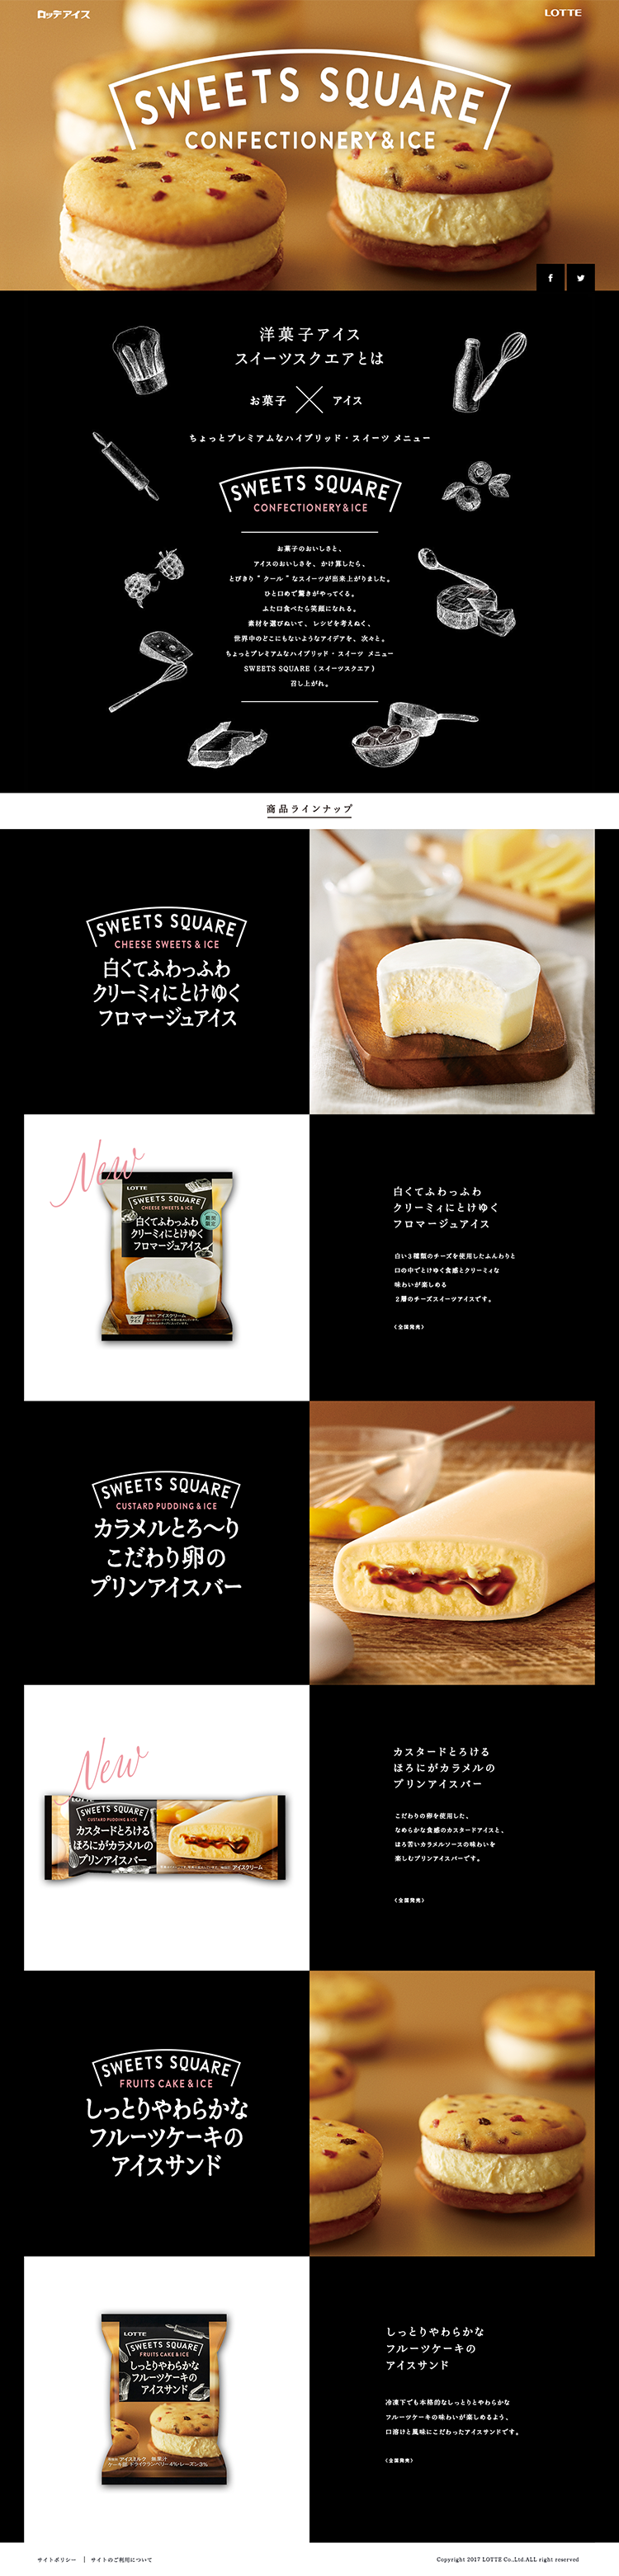 SWEETS SQUARE_pc_1